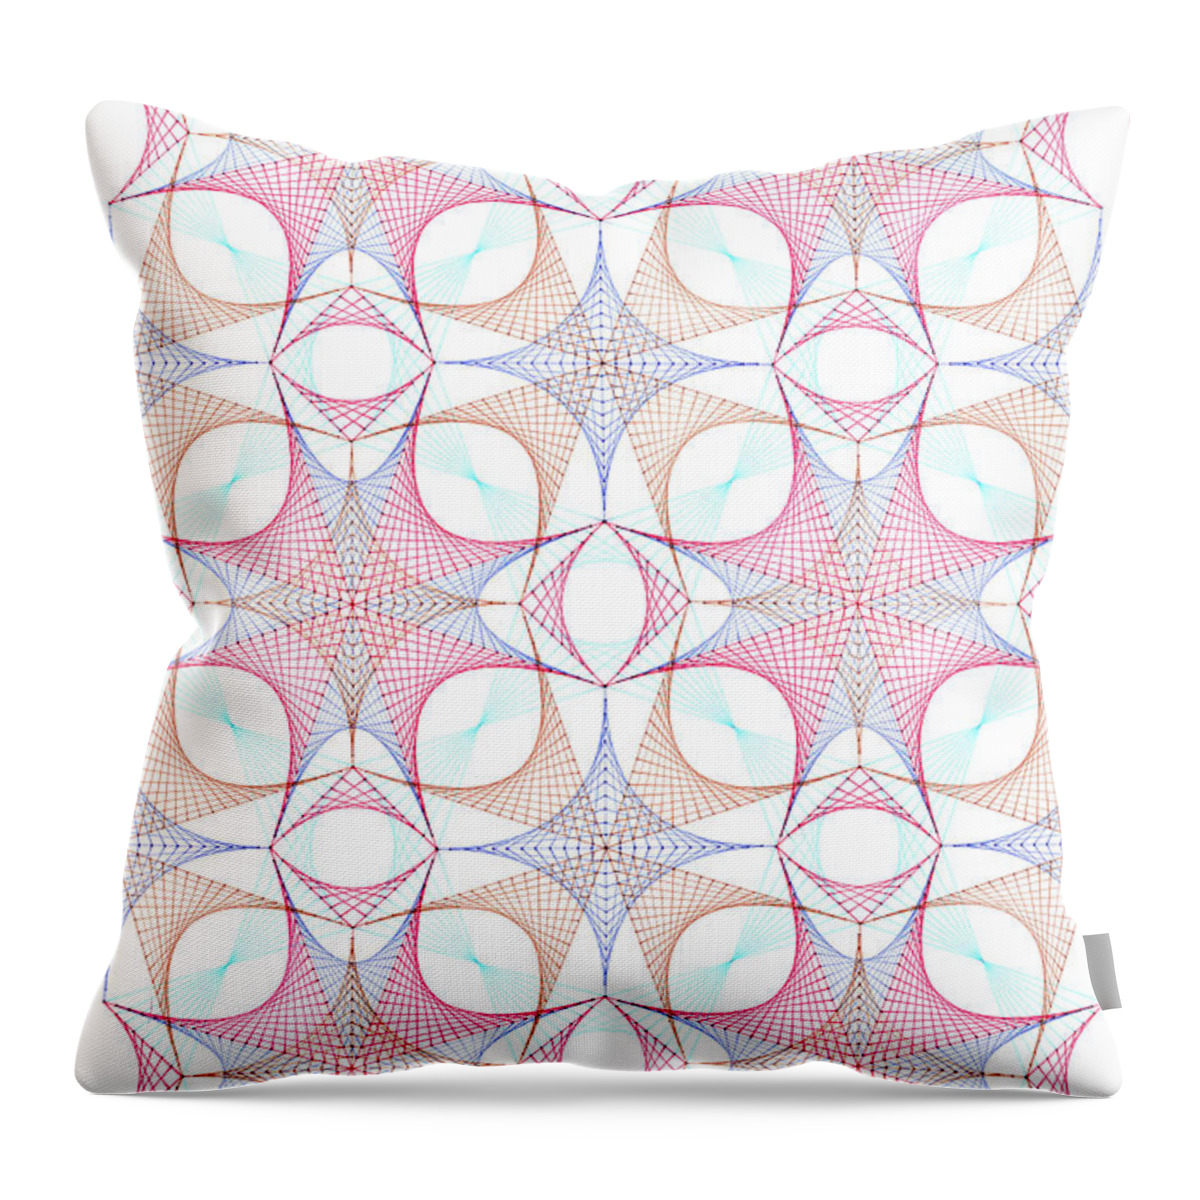 Geometry Throw Pillow featuring the drawing Capture by Bev Donohoe